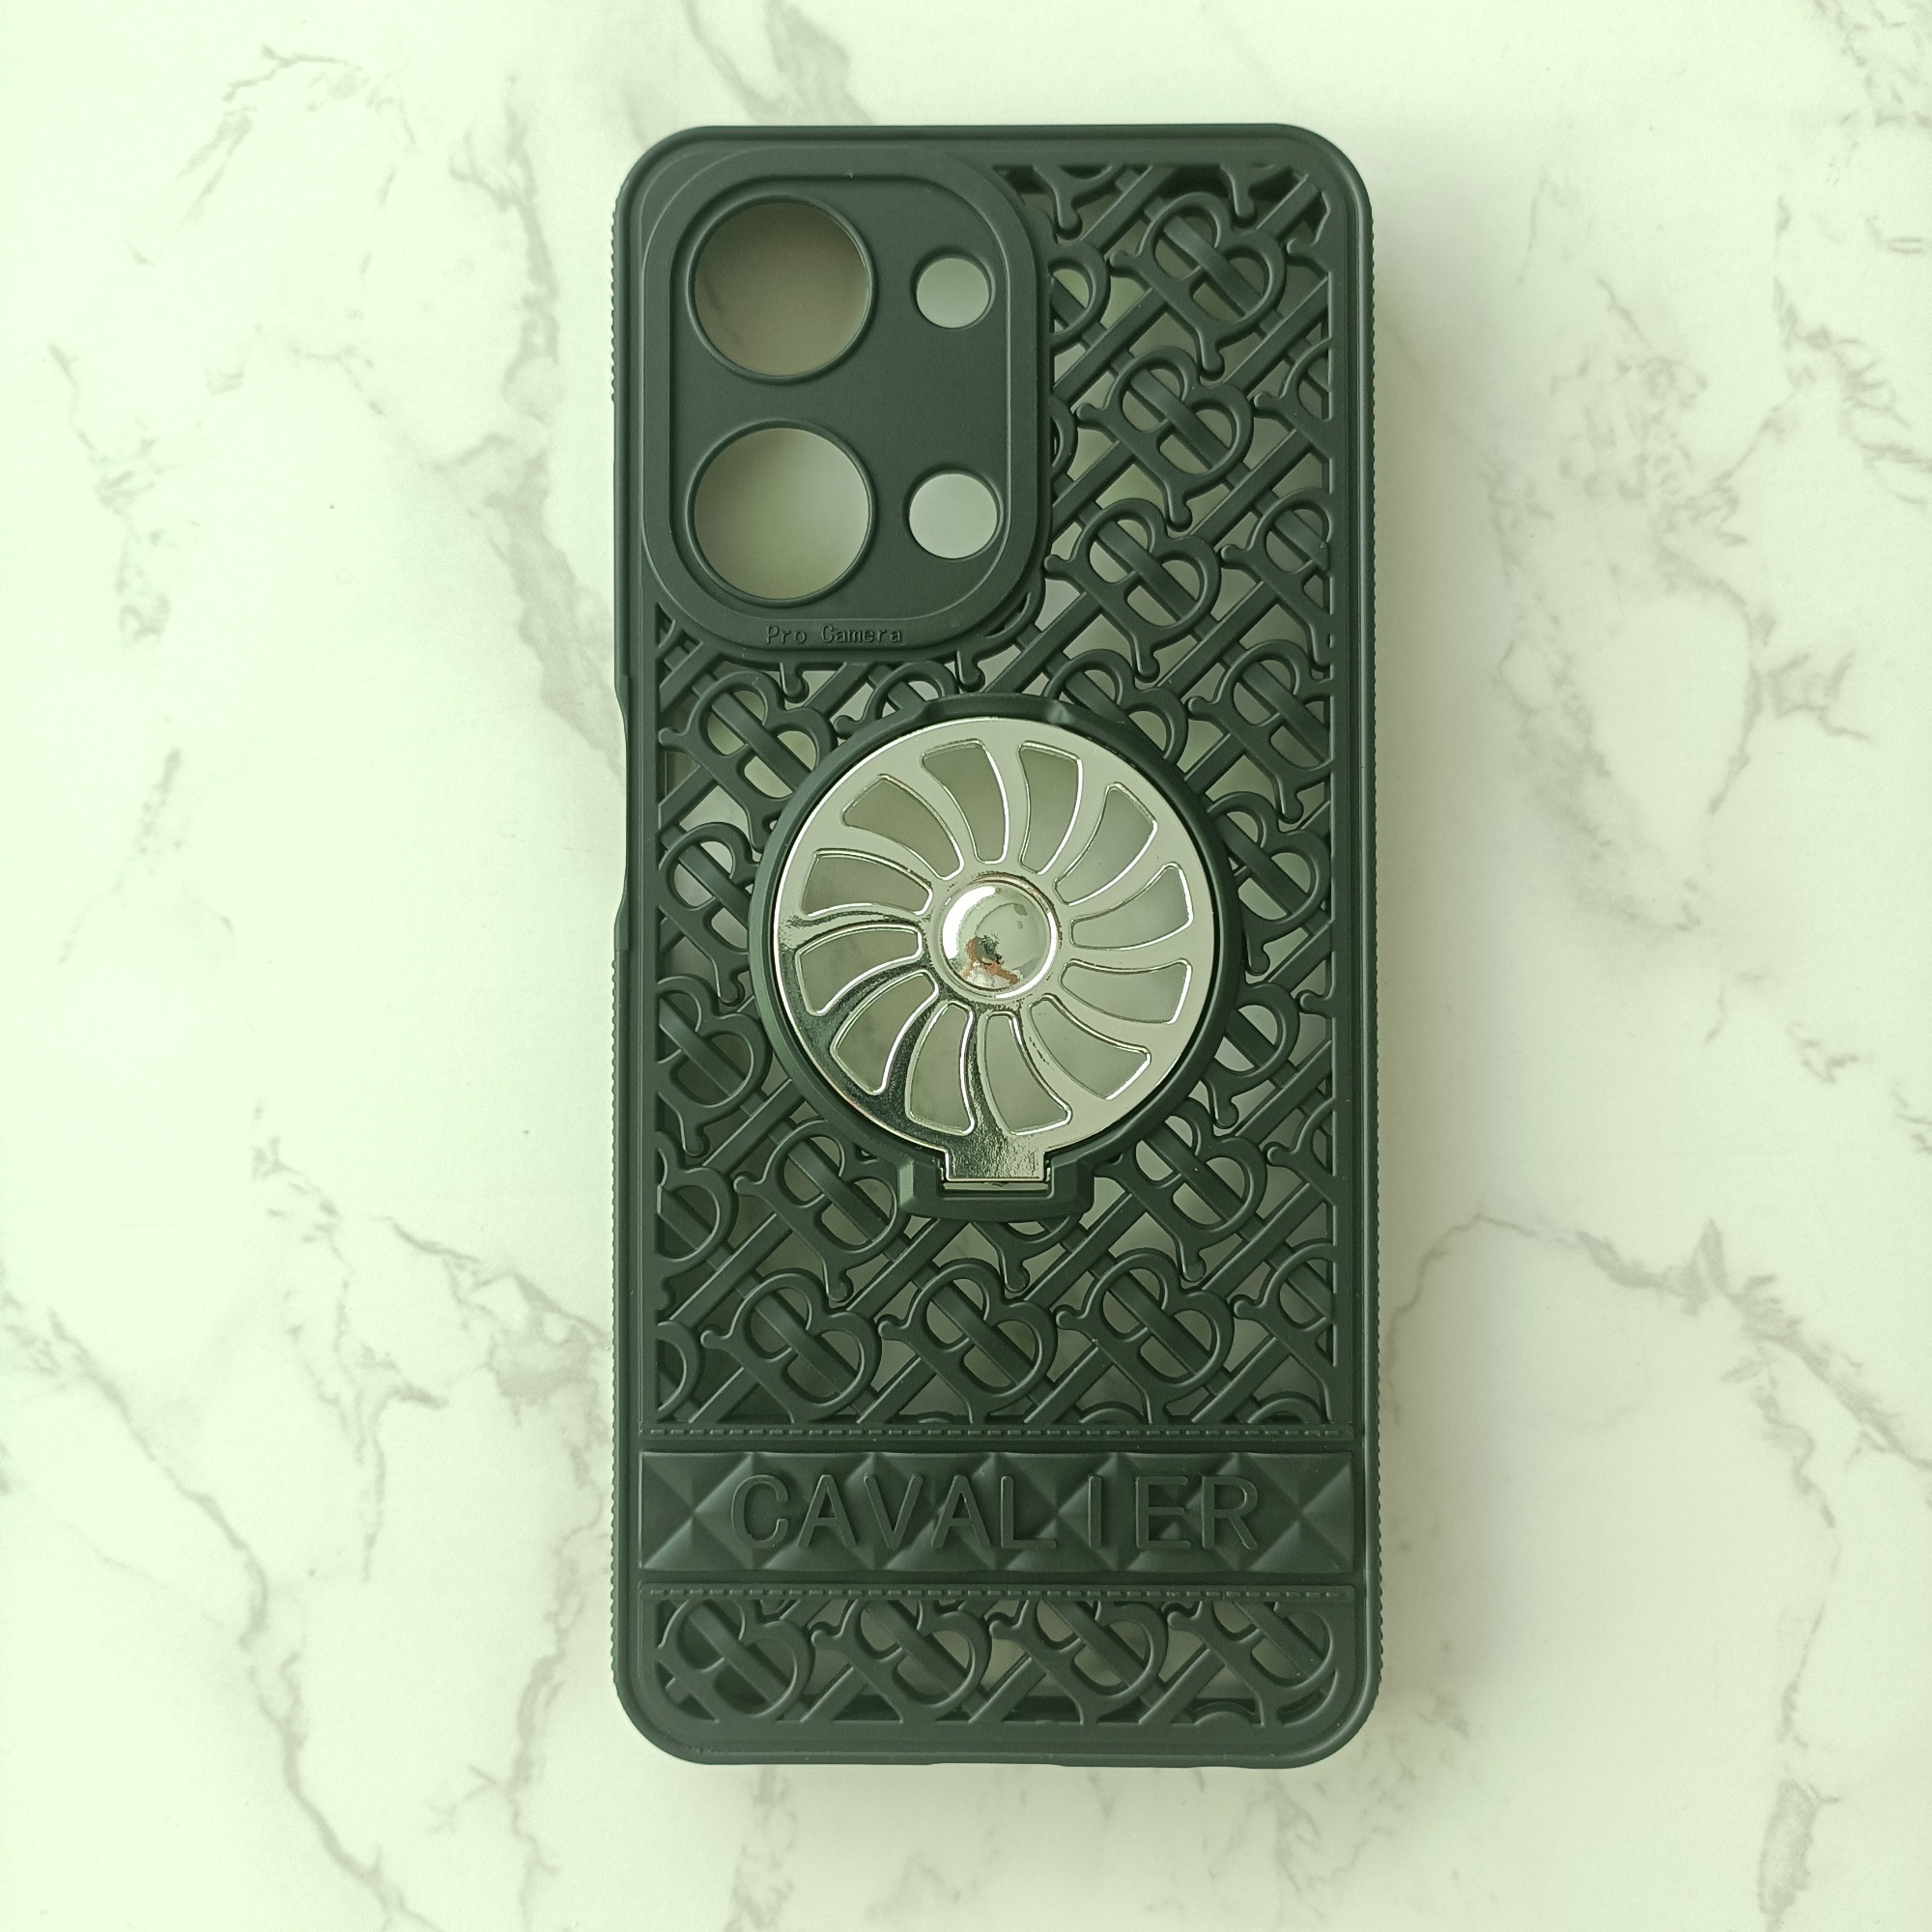 The African Knight case works with the new INFINIX SMART 8 case